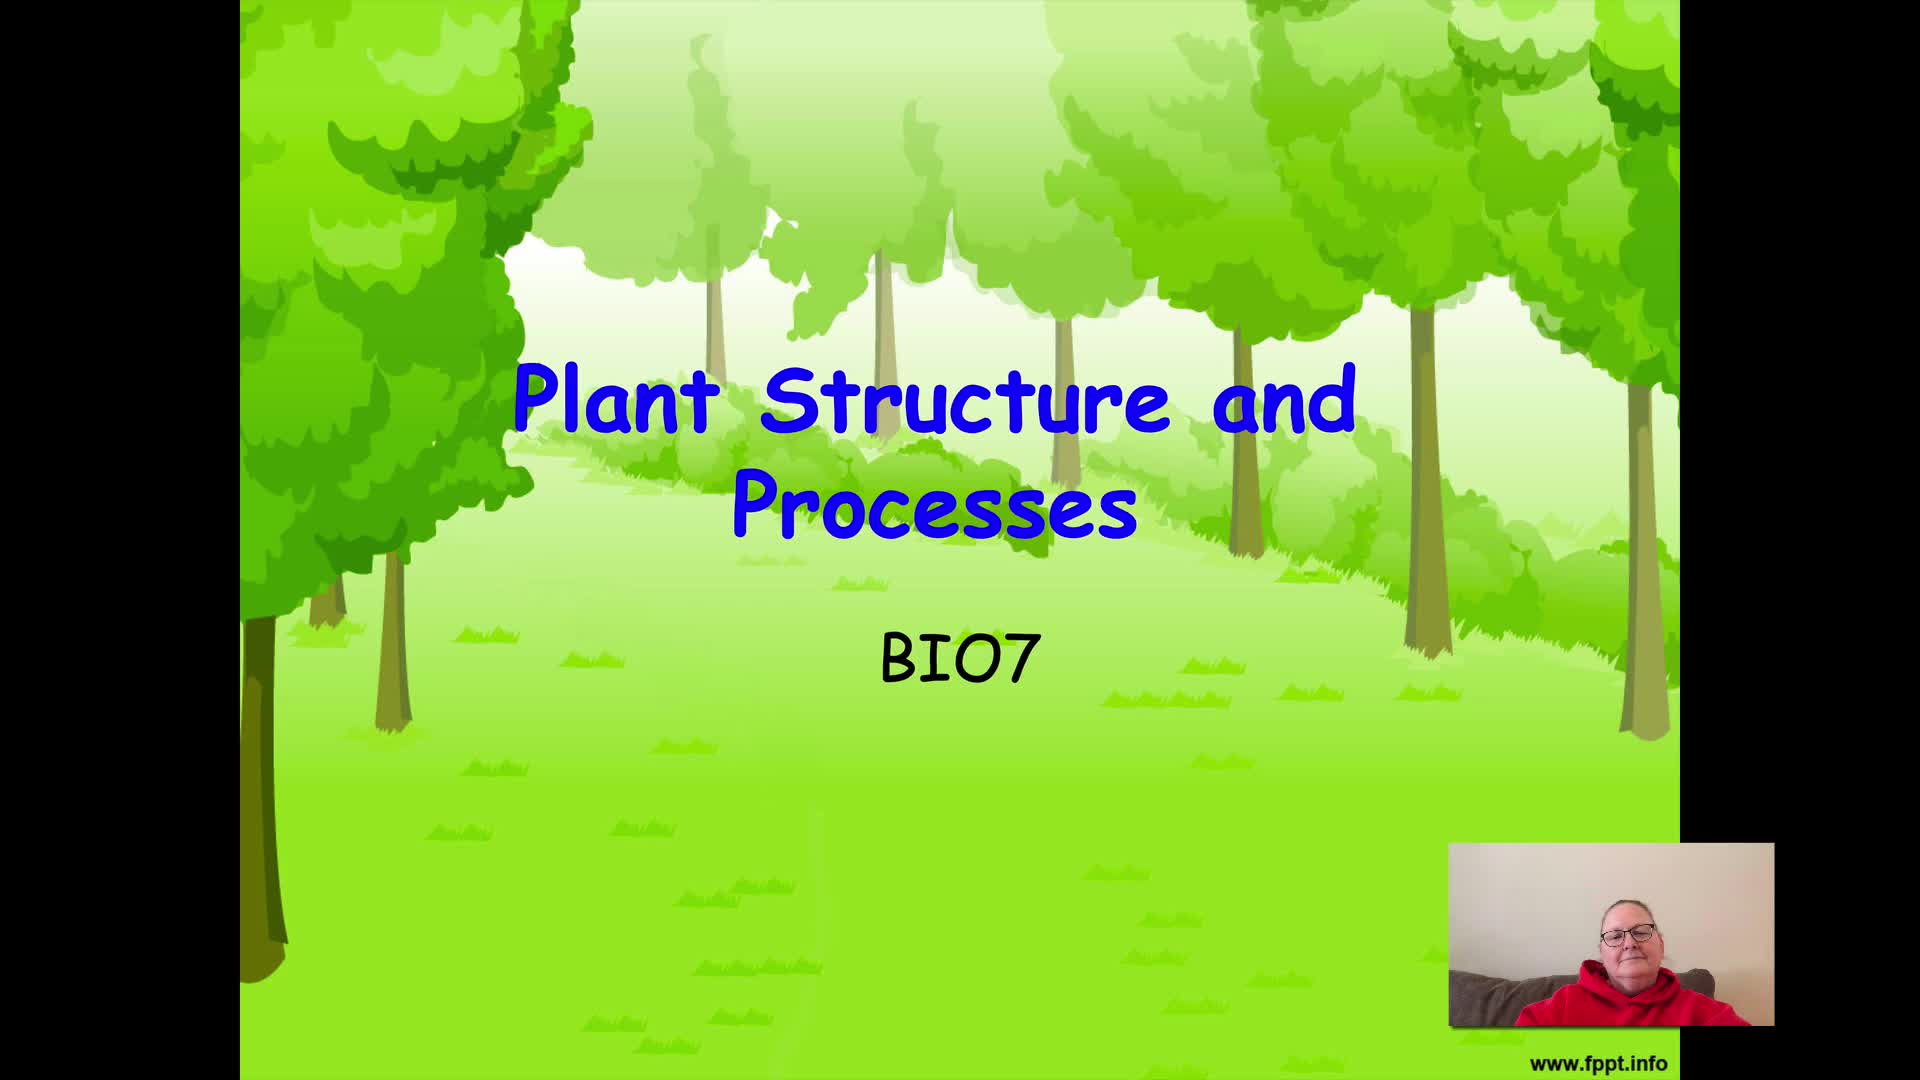 BIO7 - Plant Structures and Processes